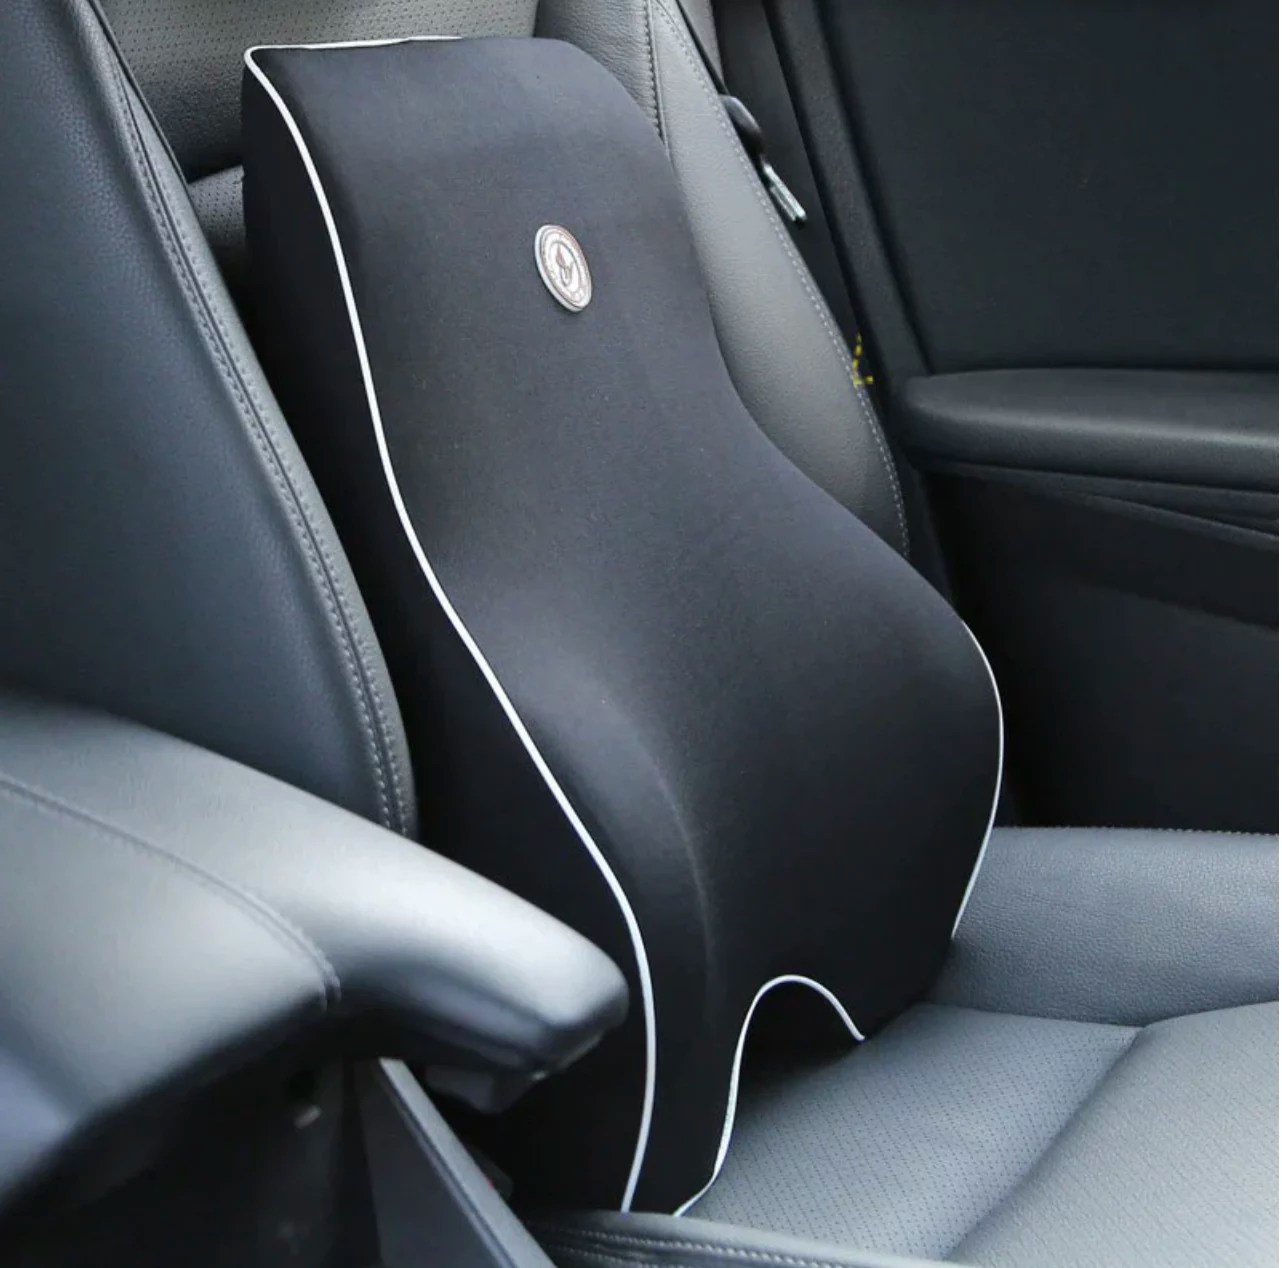 Lumbar Support Pillow Back Support Cushion for Car Seat Lower Back